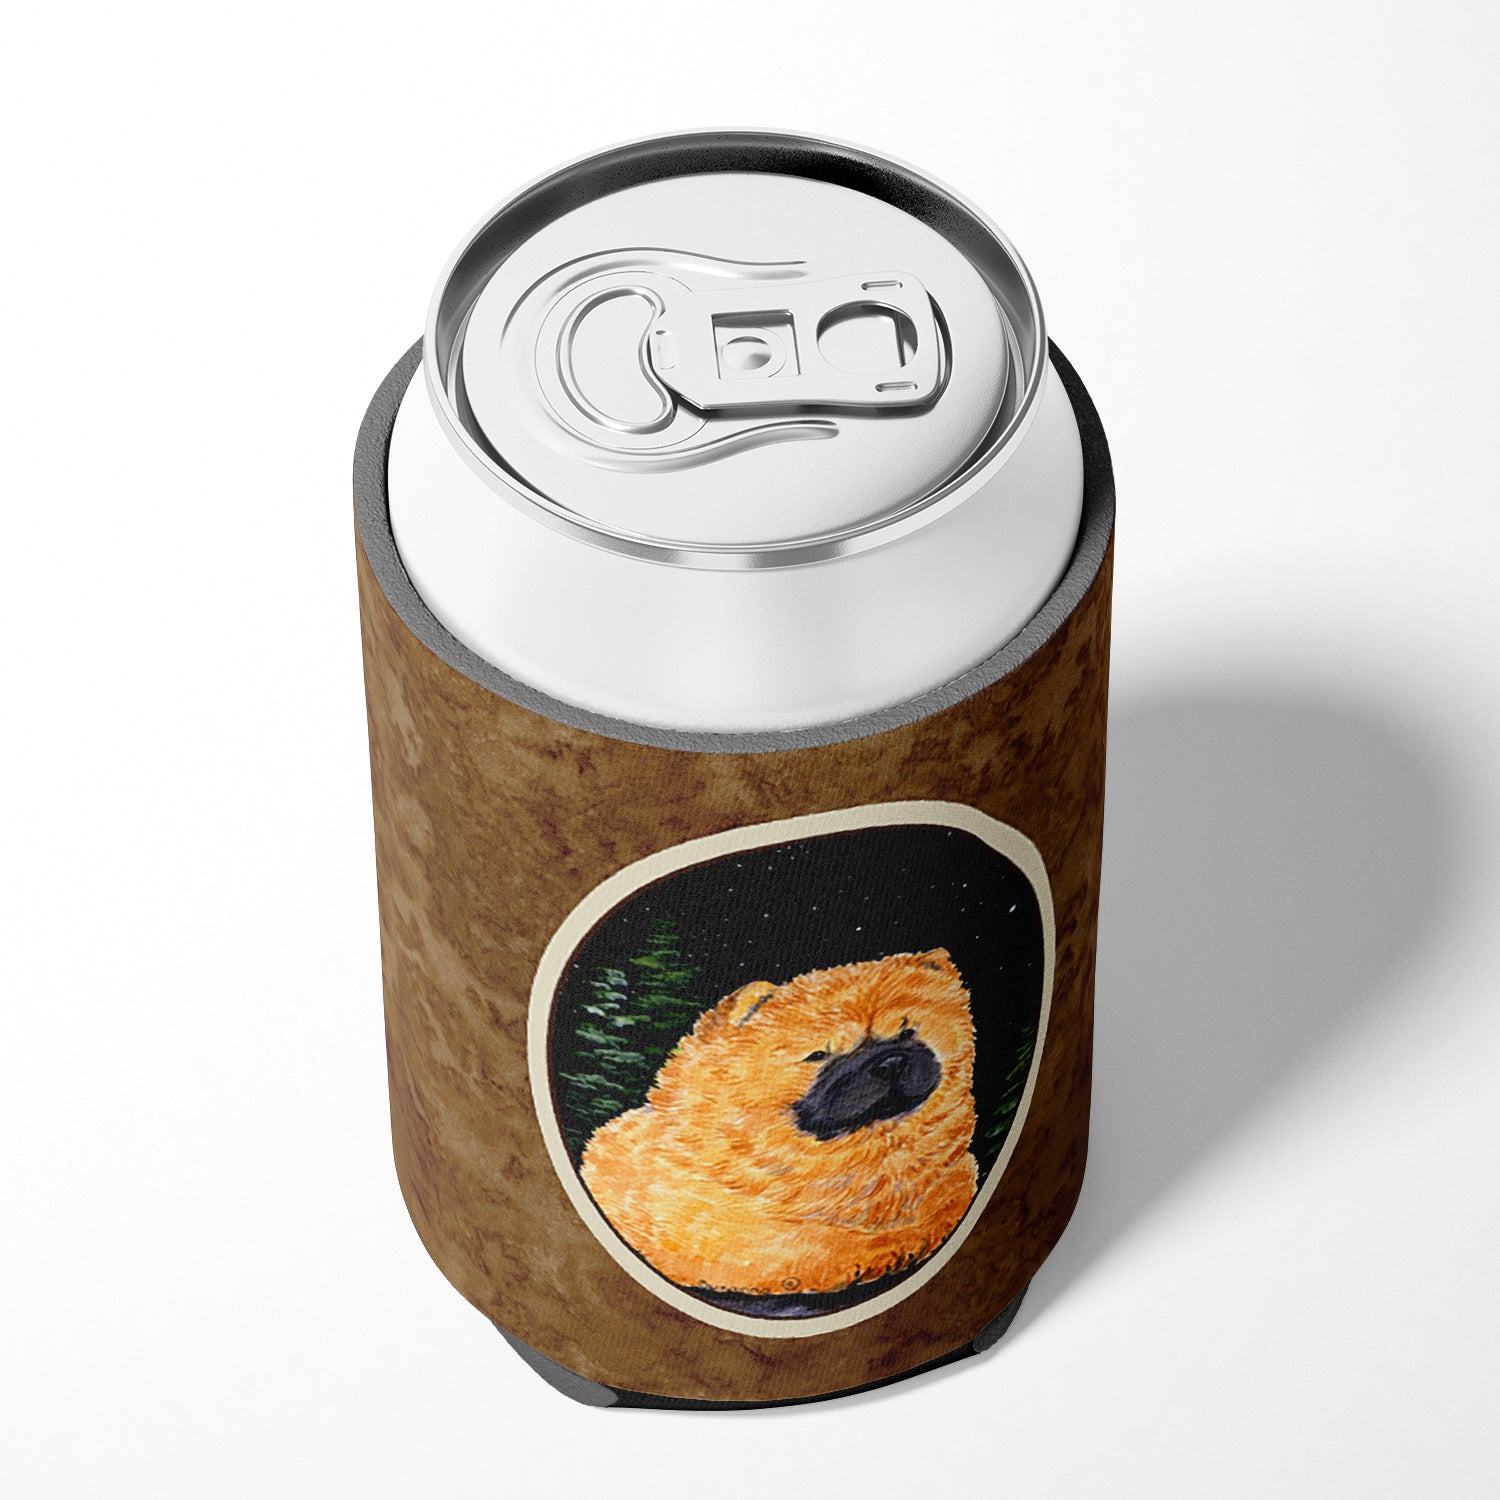 Starry Night Chow Chow Can or Bottle Beverage Insulator Hugger.